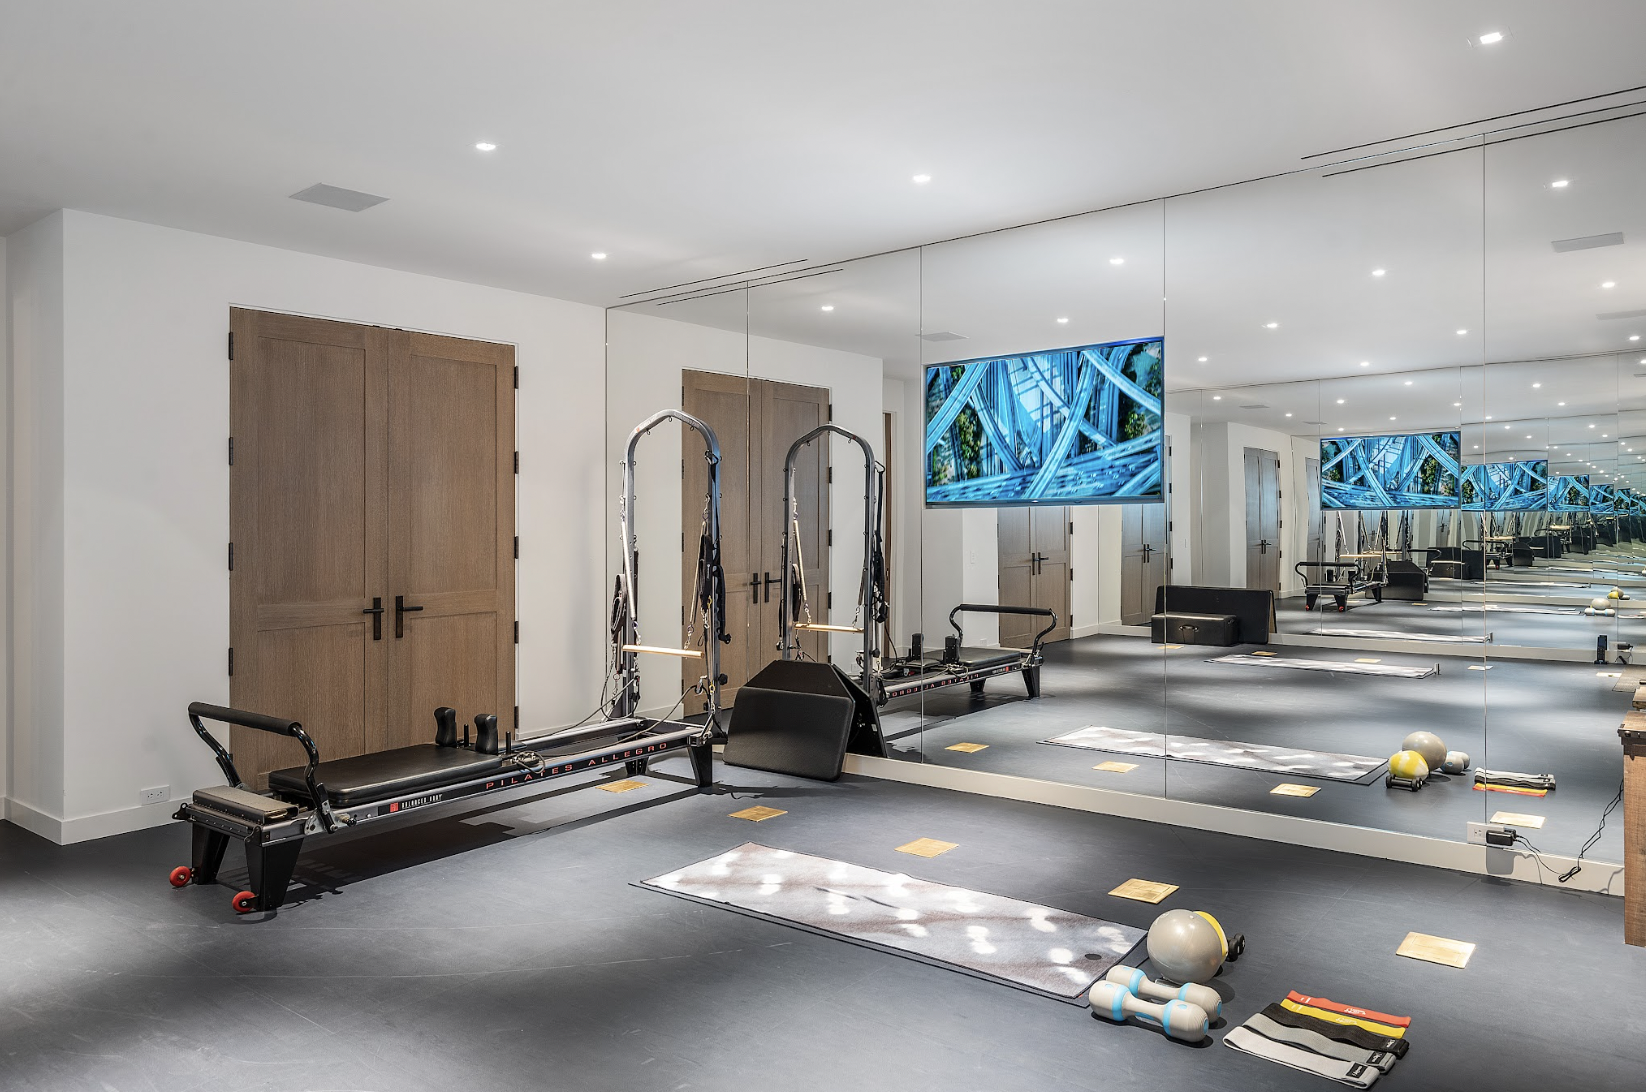 An empty workout room contains pilates equipment and a mat with weights.